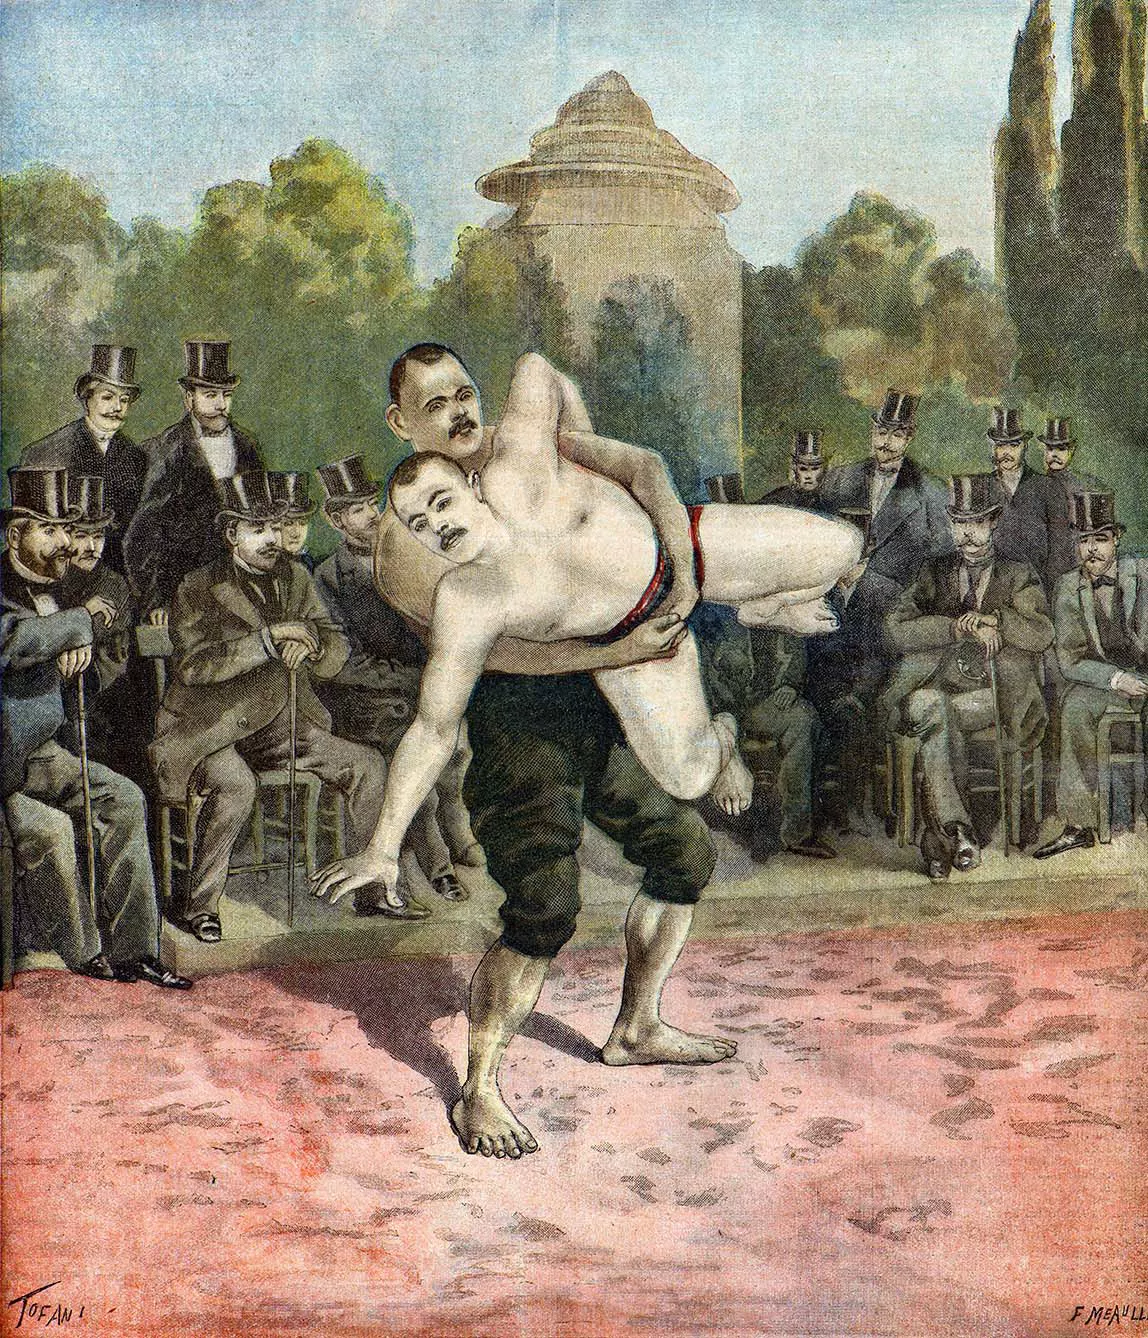 Demonstration of wrestlers Pierri and Usouf Ismaillolo